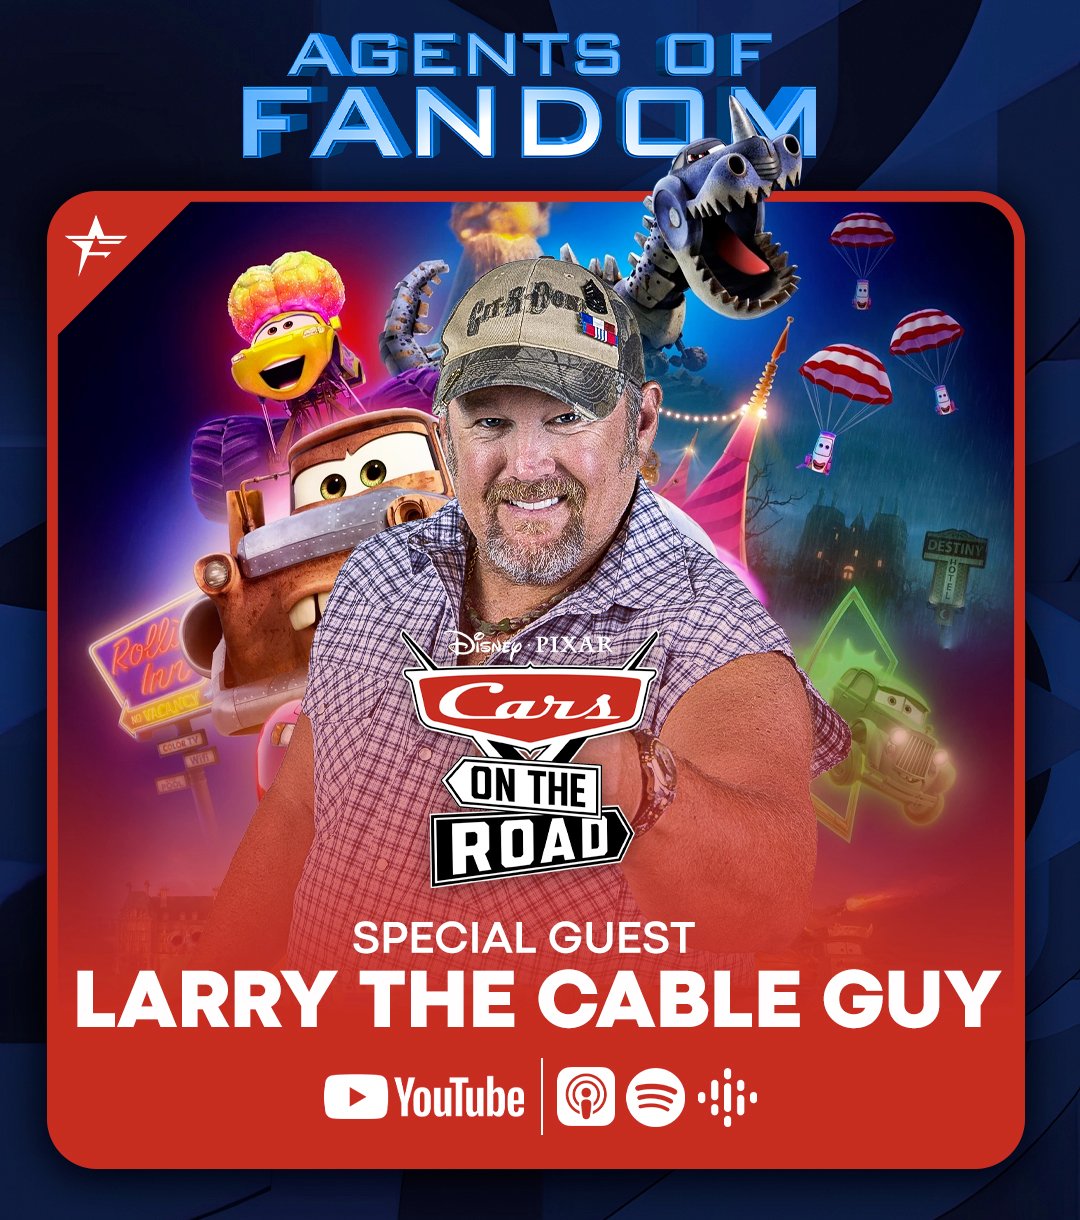 The Agents of Fandom with Larry the Cable Guy of Cars On The Road | Agents of Fandom